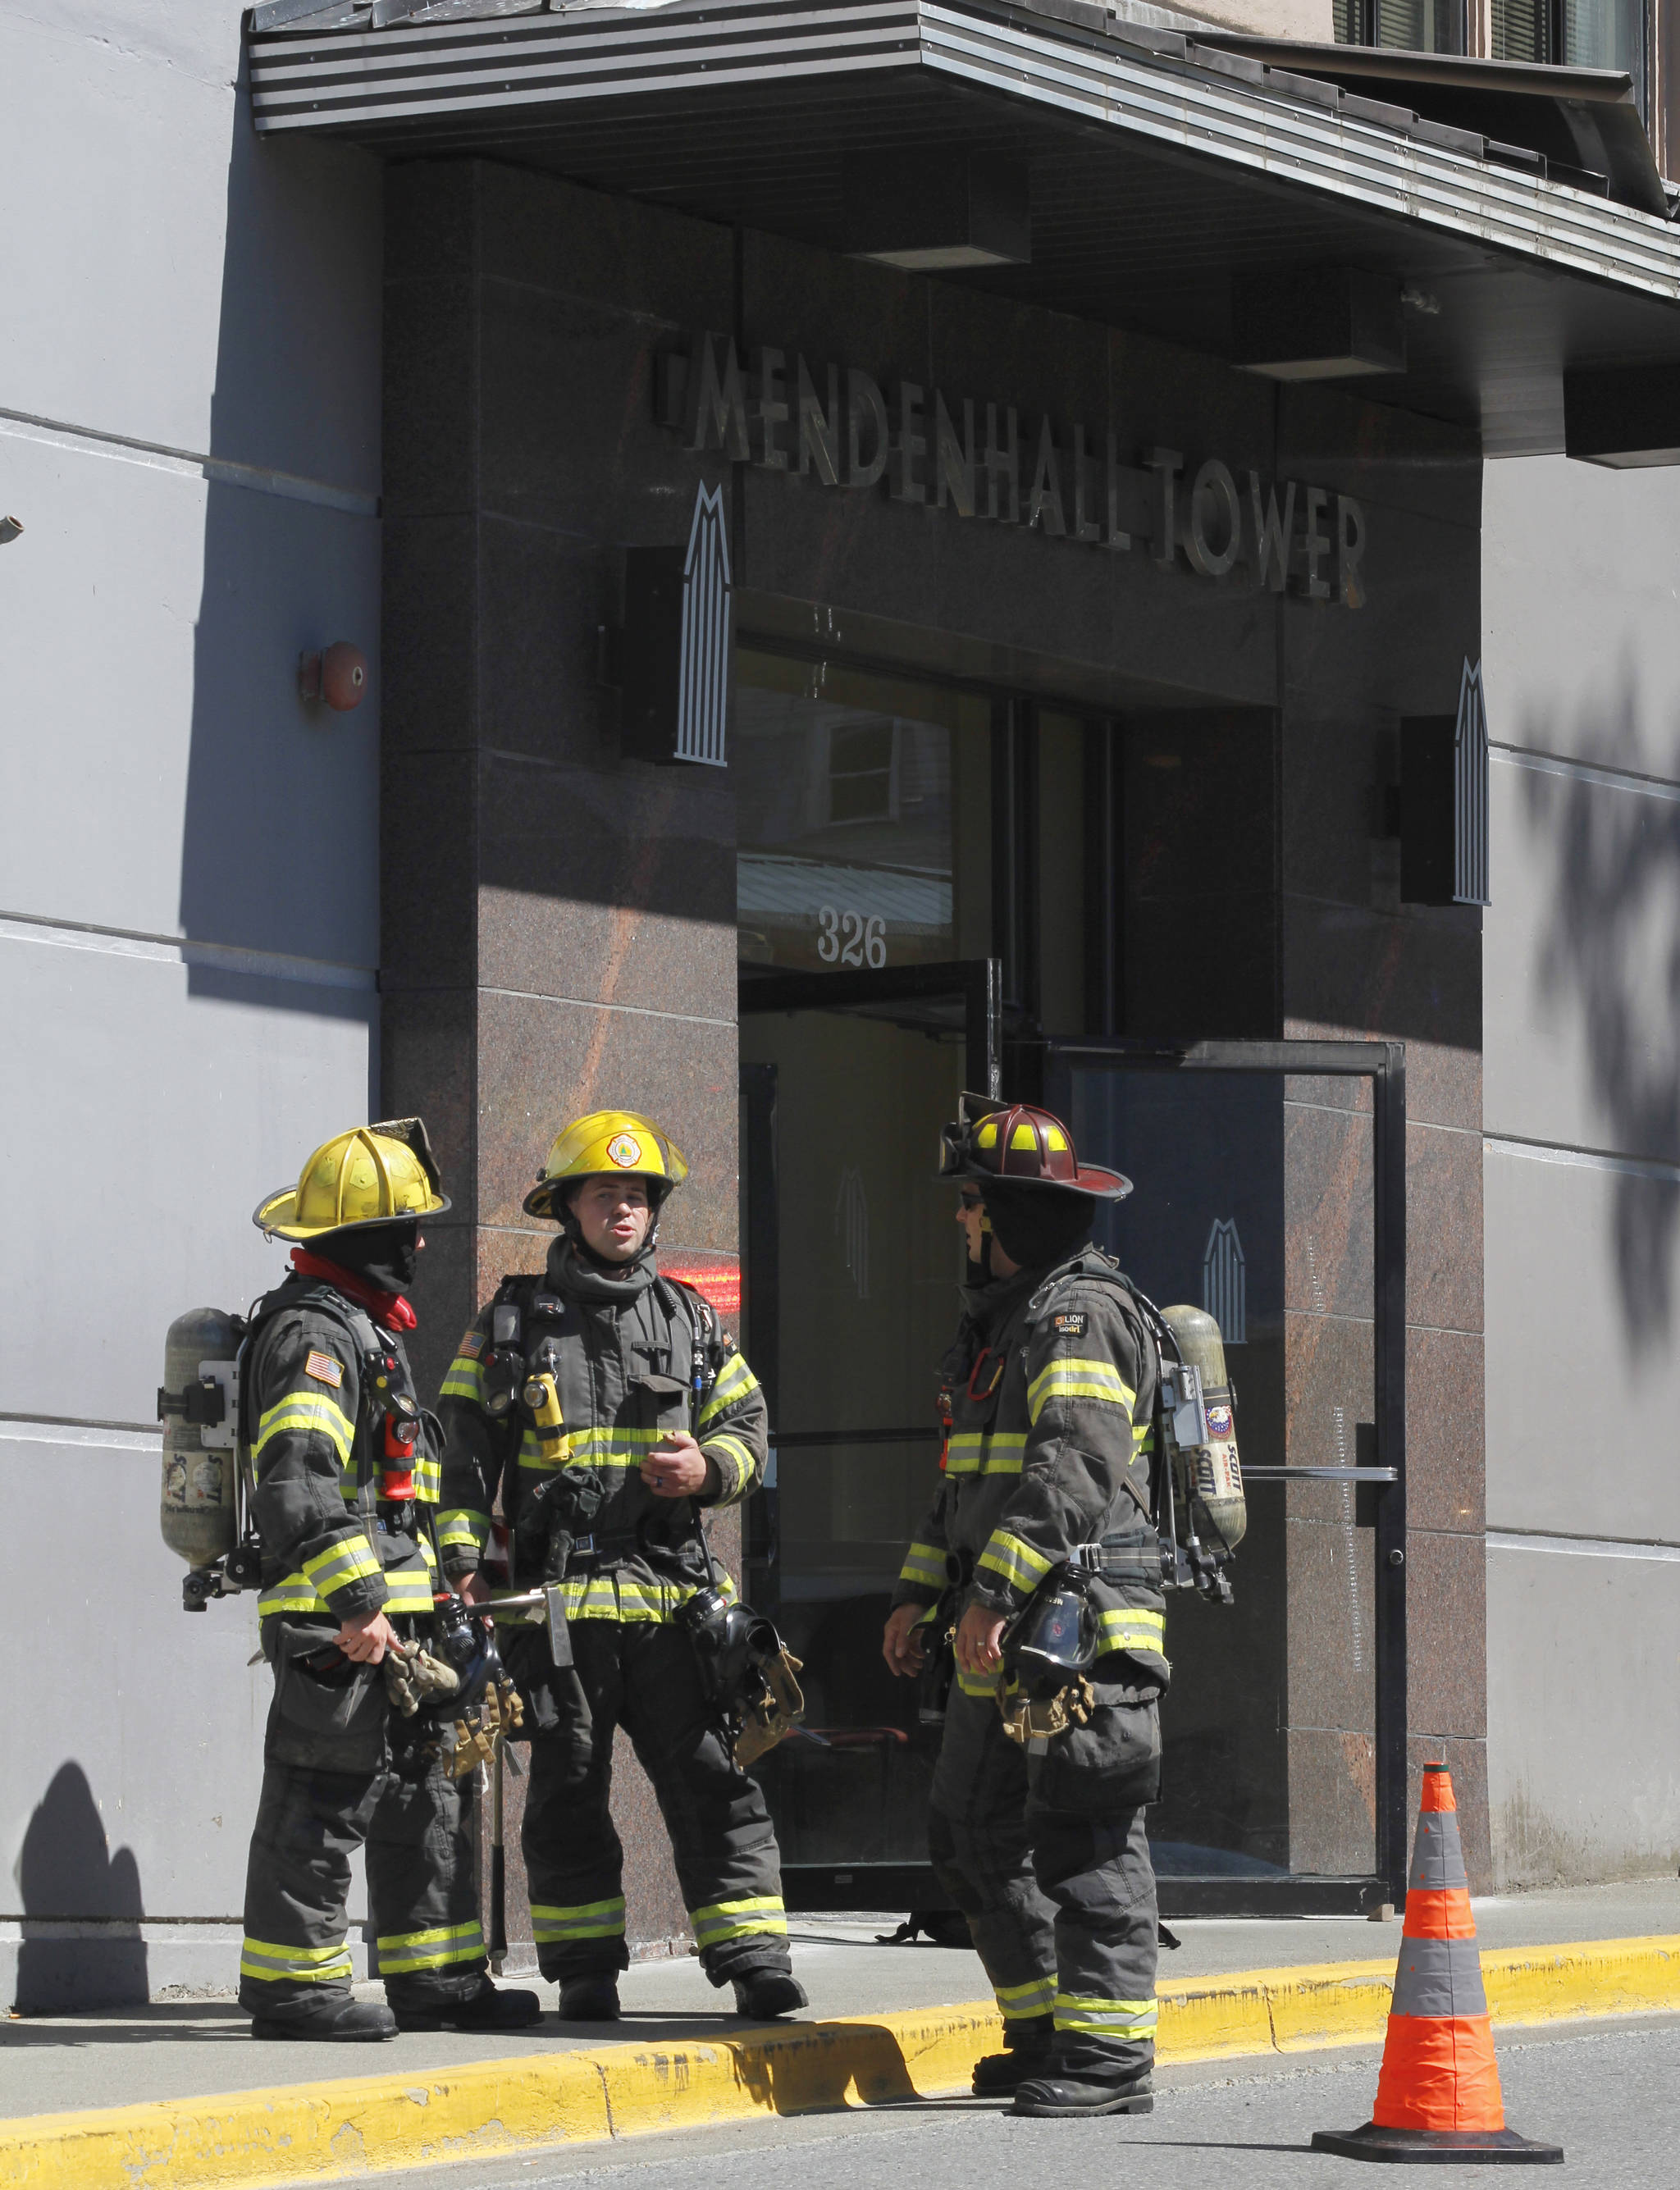 Firefighters prepare to enter the Mendenhall Tower Apartments on Thursday, July 5, 2018 to respond to a kitchen fire on the third floor. (Alex McCarthy | Juneau Empire)